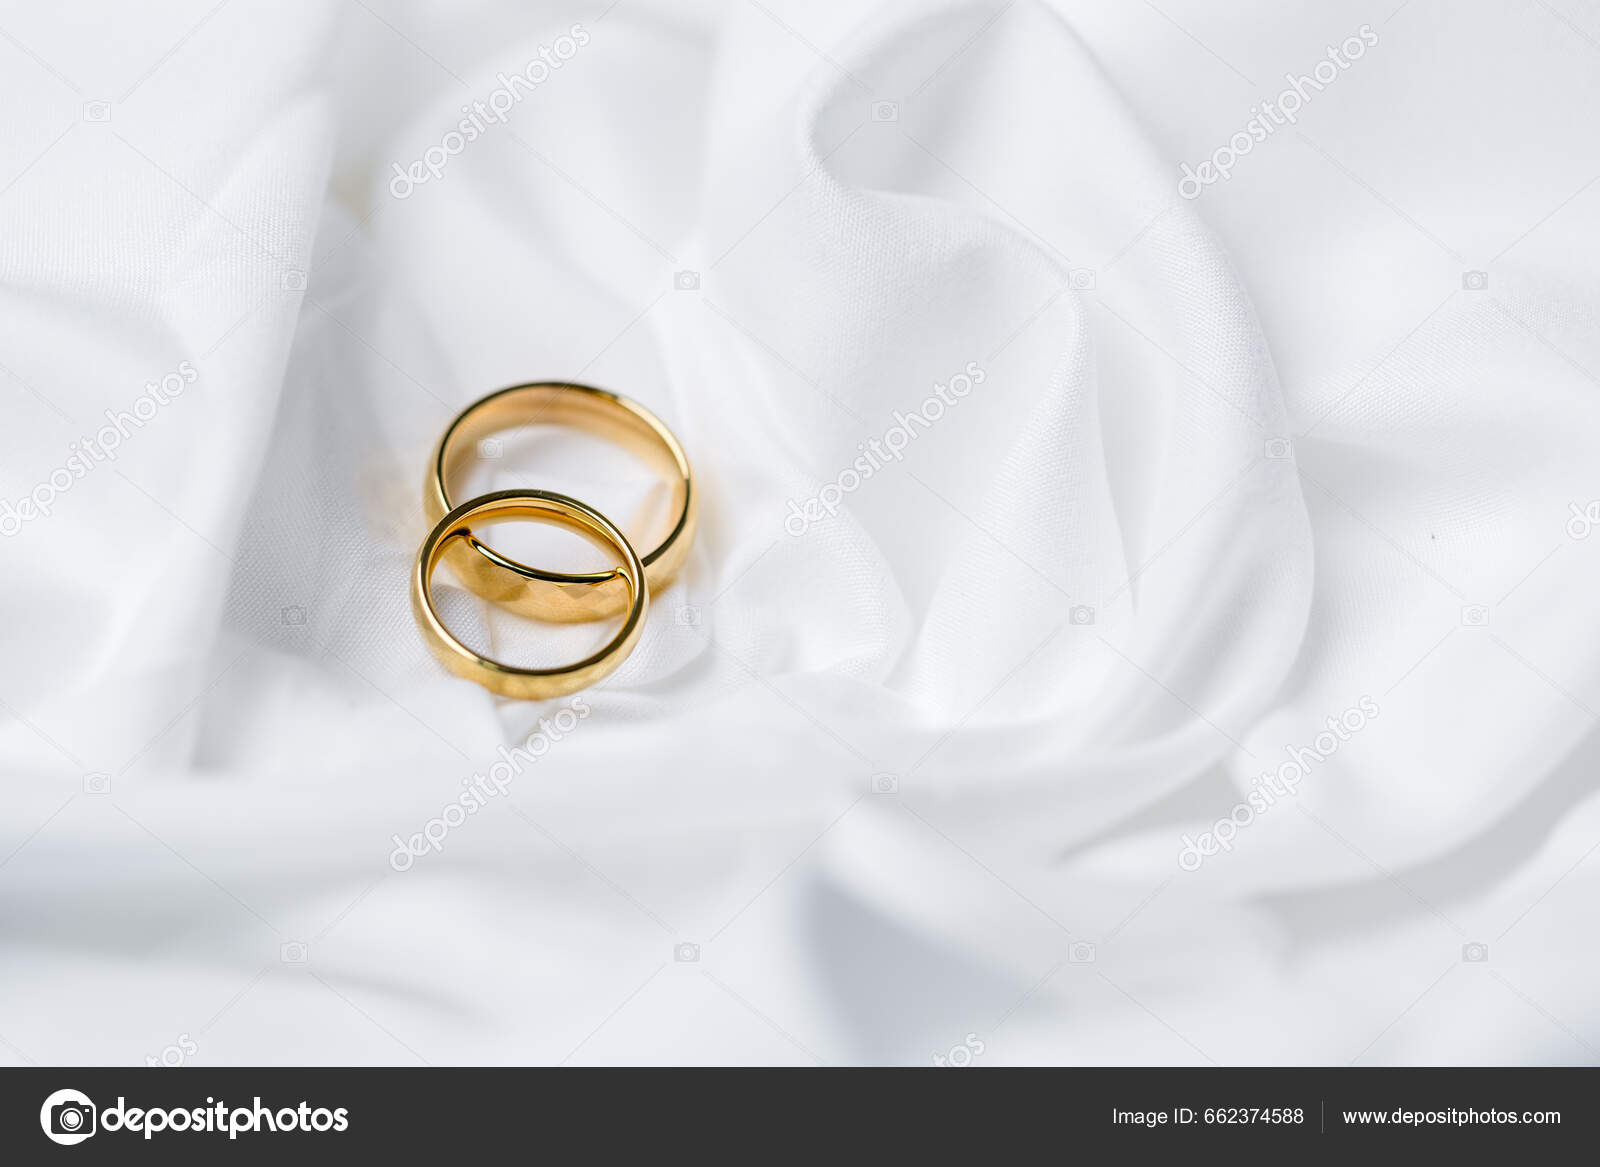 Premium Vector | Realistic gold wedding rings isolated on white background  symbol of love and marriage. realistic wedding design. vector illustration  isolated on white background